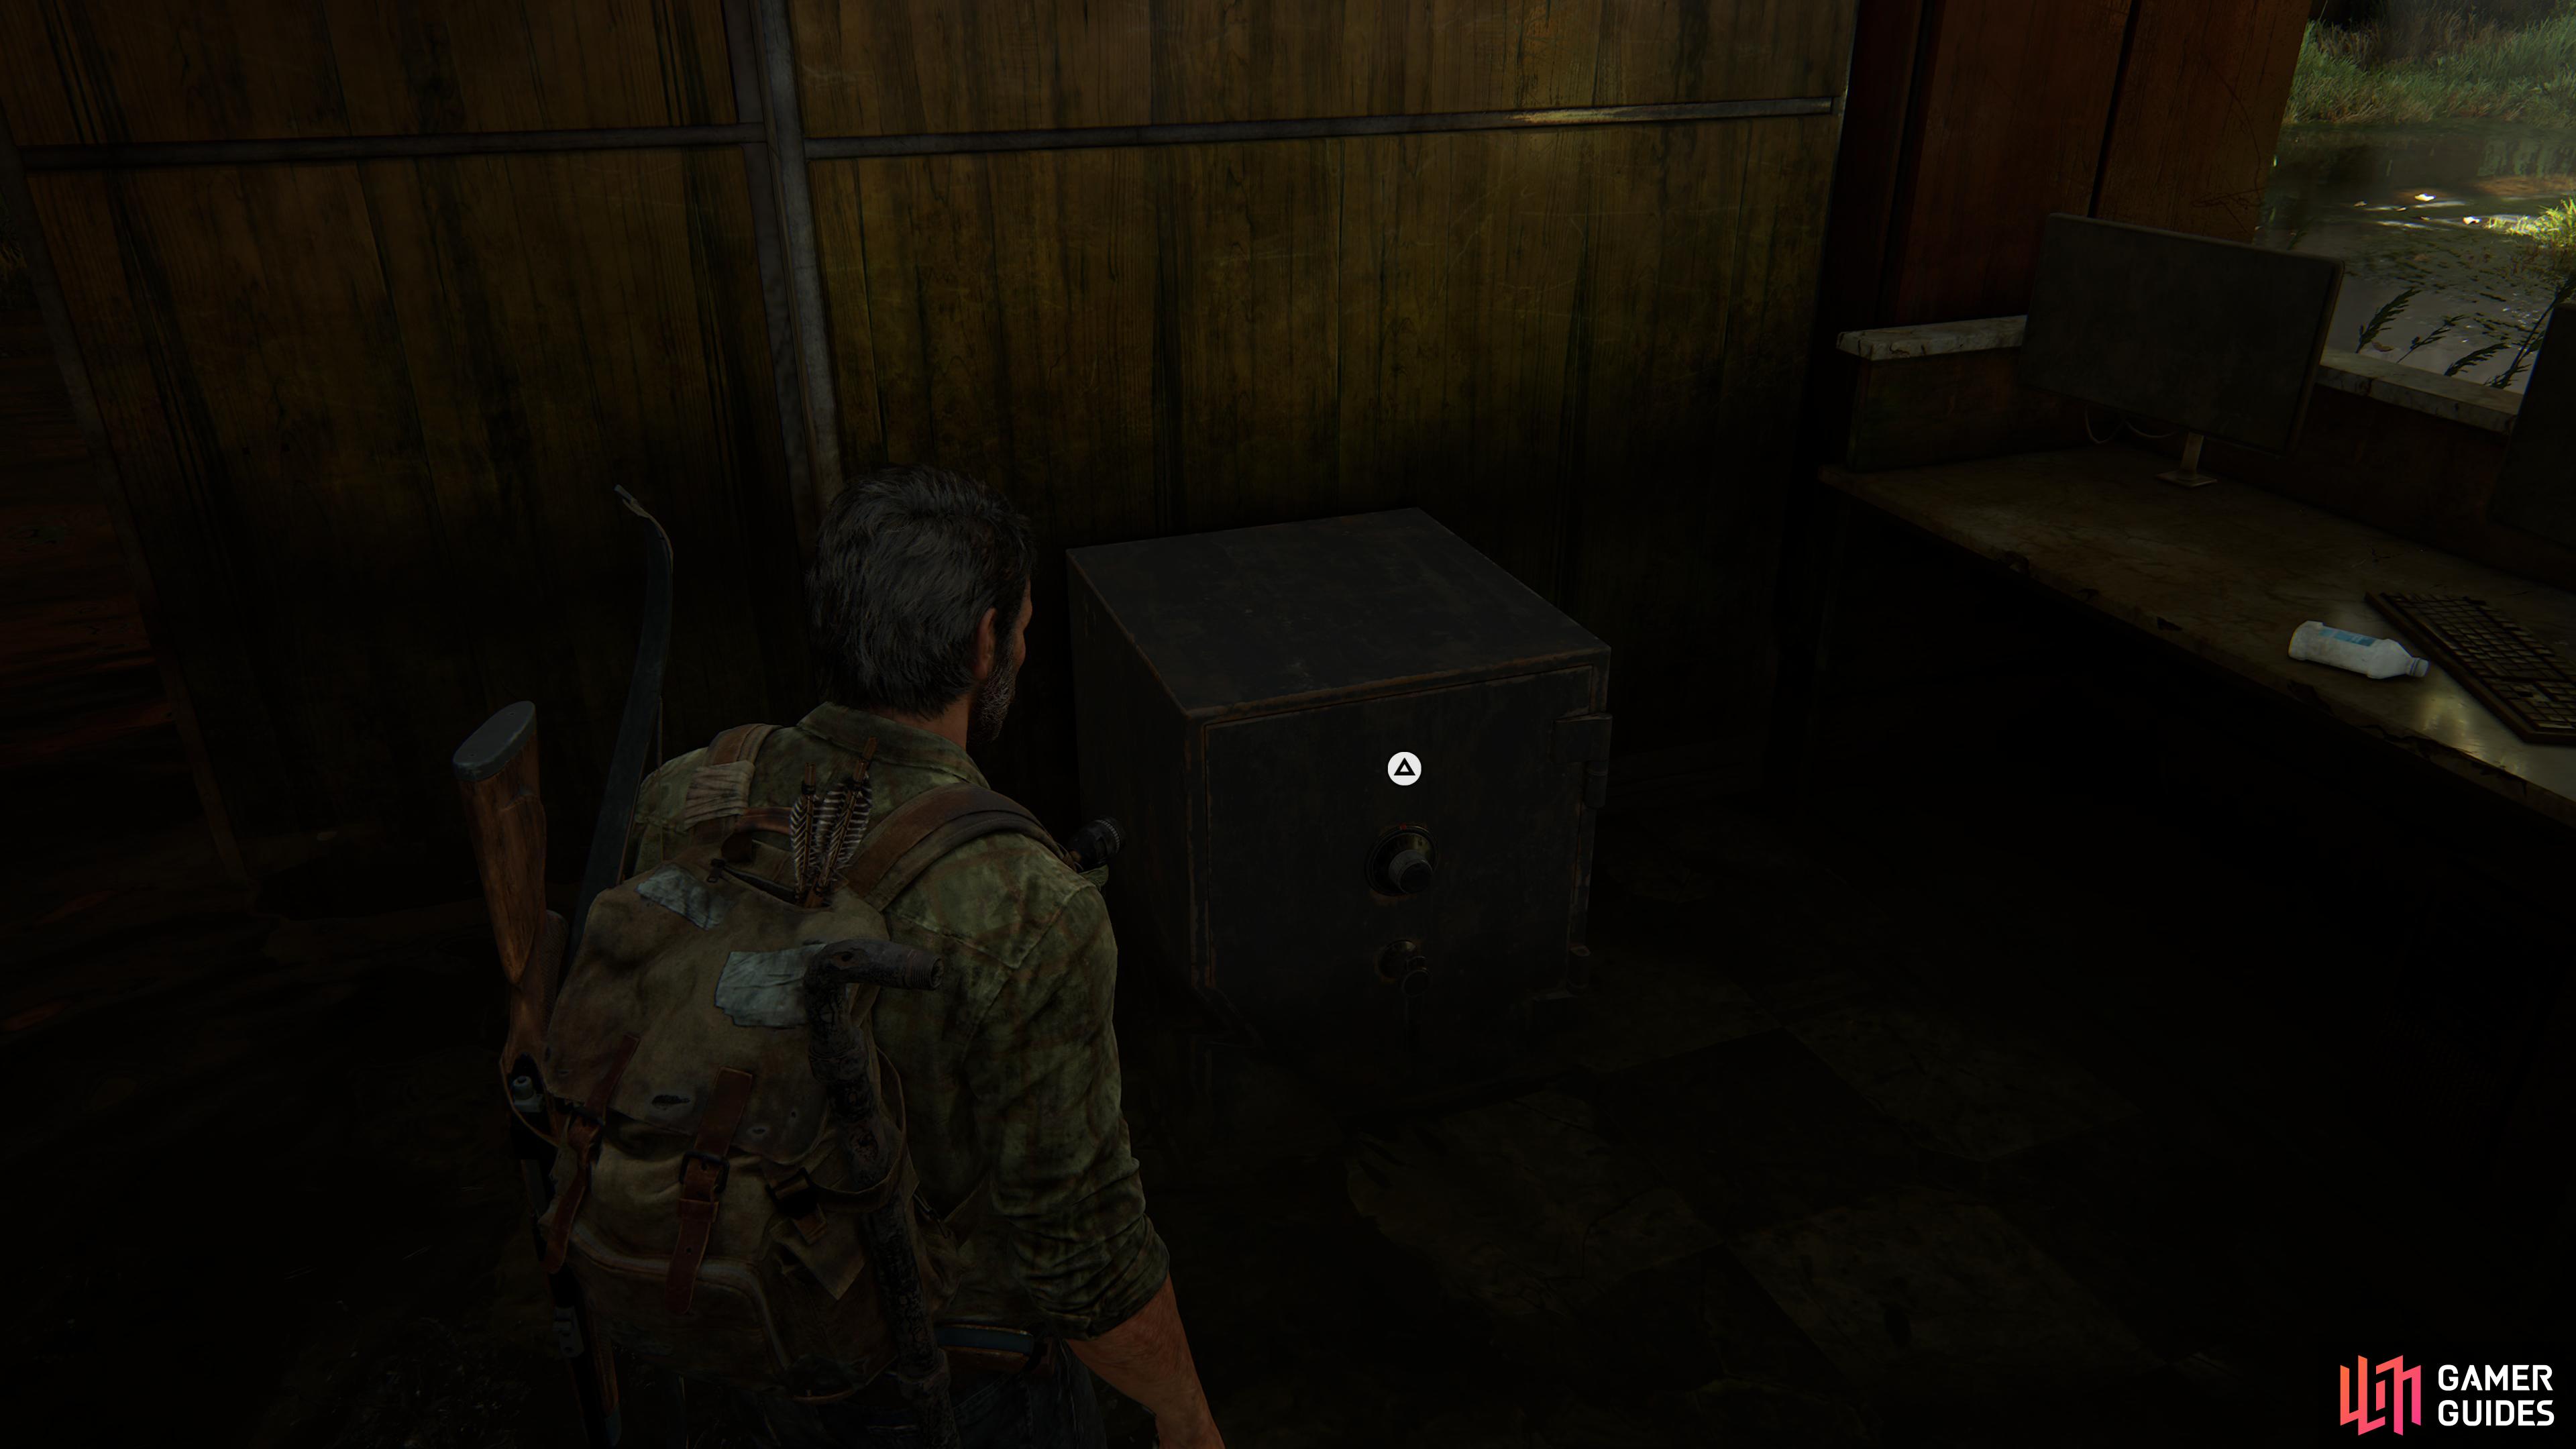 You can find the safe behind the Hotel Lobby counter.